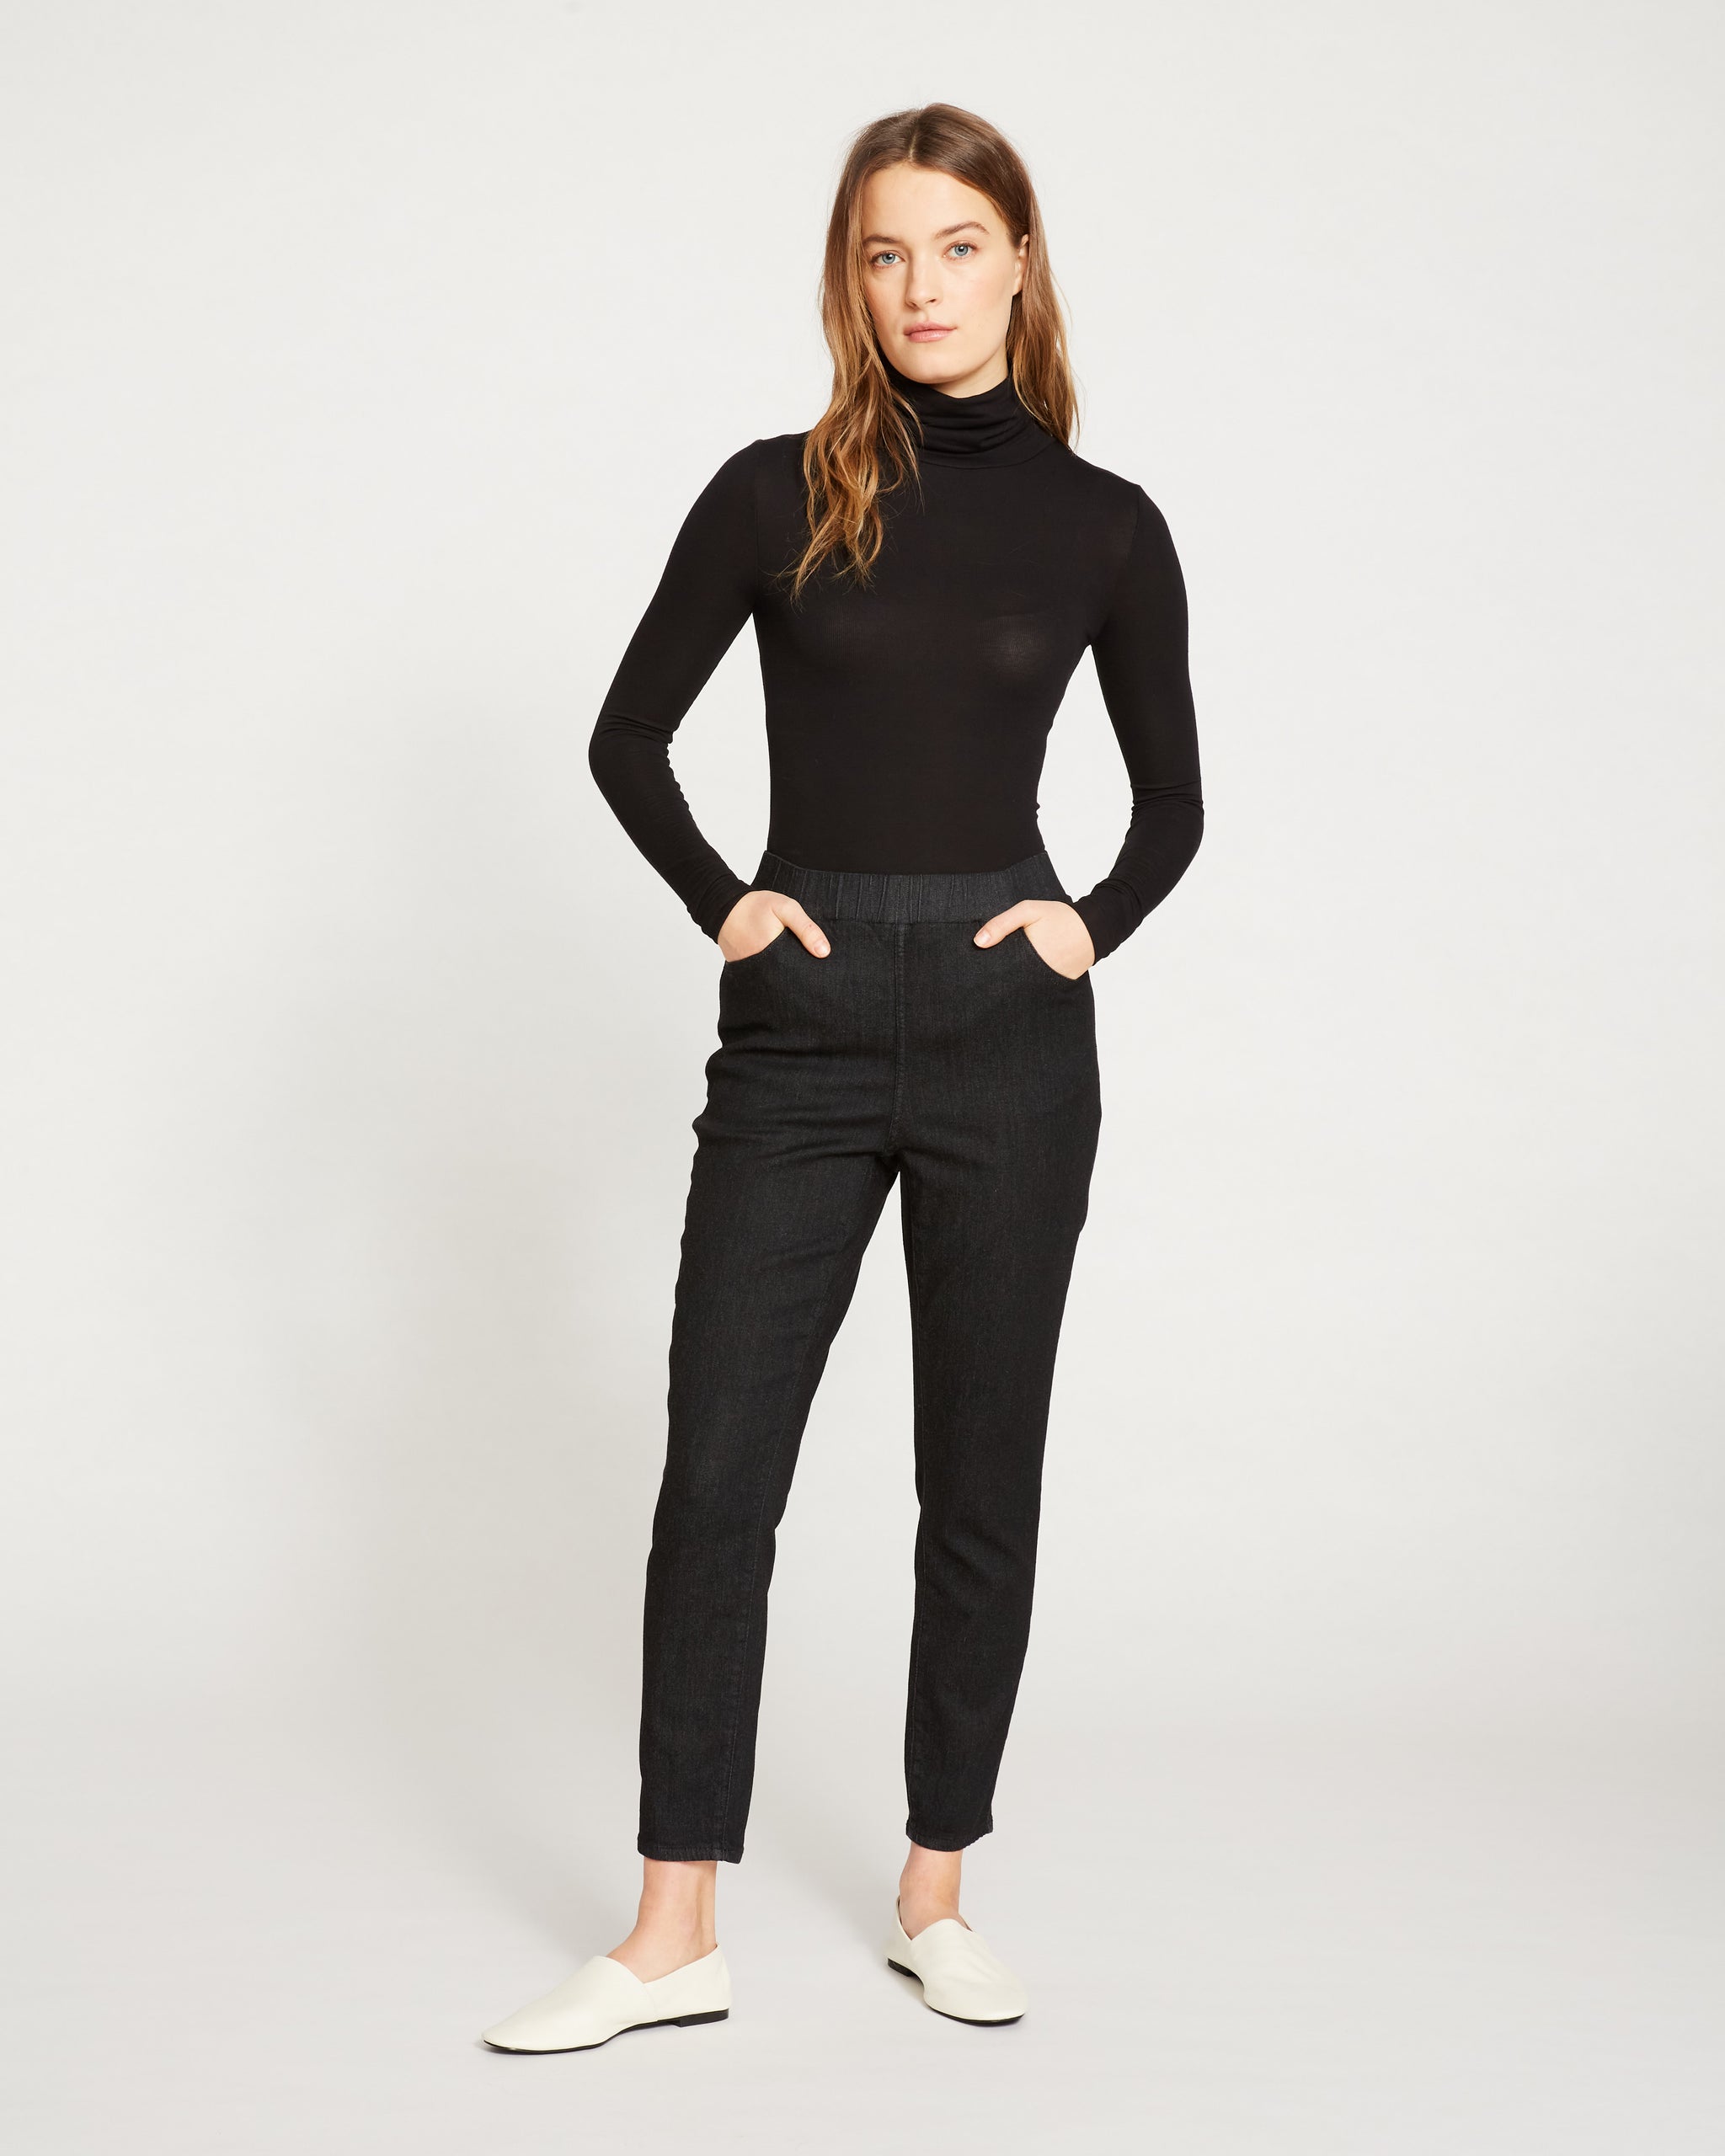 Skinny Leg Pocket Jeggings Black (827BLK)A perfect pair of pants for  comfort and style! These new skinny fit jeggings feature 2 rear pocket and  2 front pockets. Made from a cotton spandex